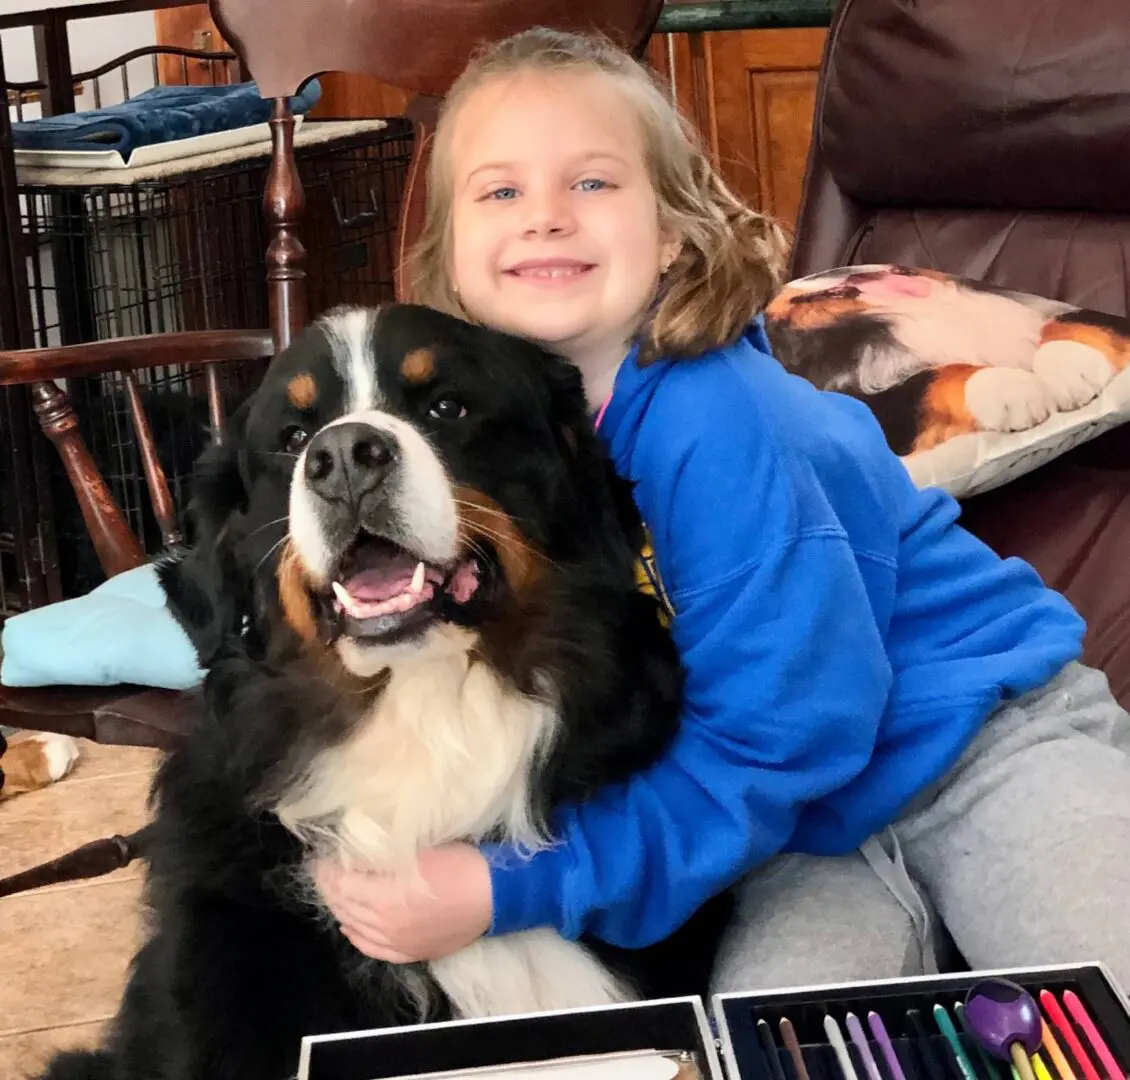 A Kid is Playing With Her Pet Dog While Sitting on the Couch